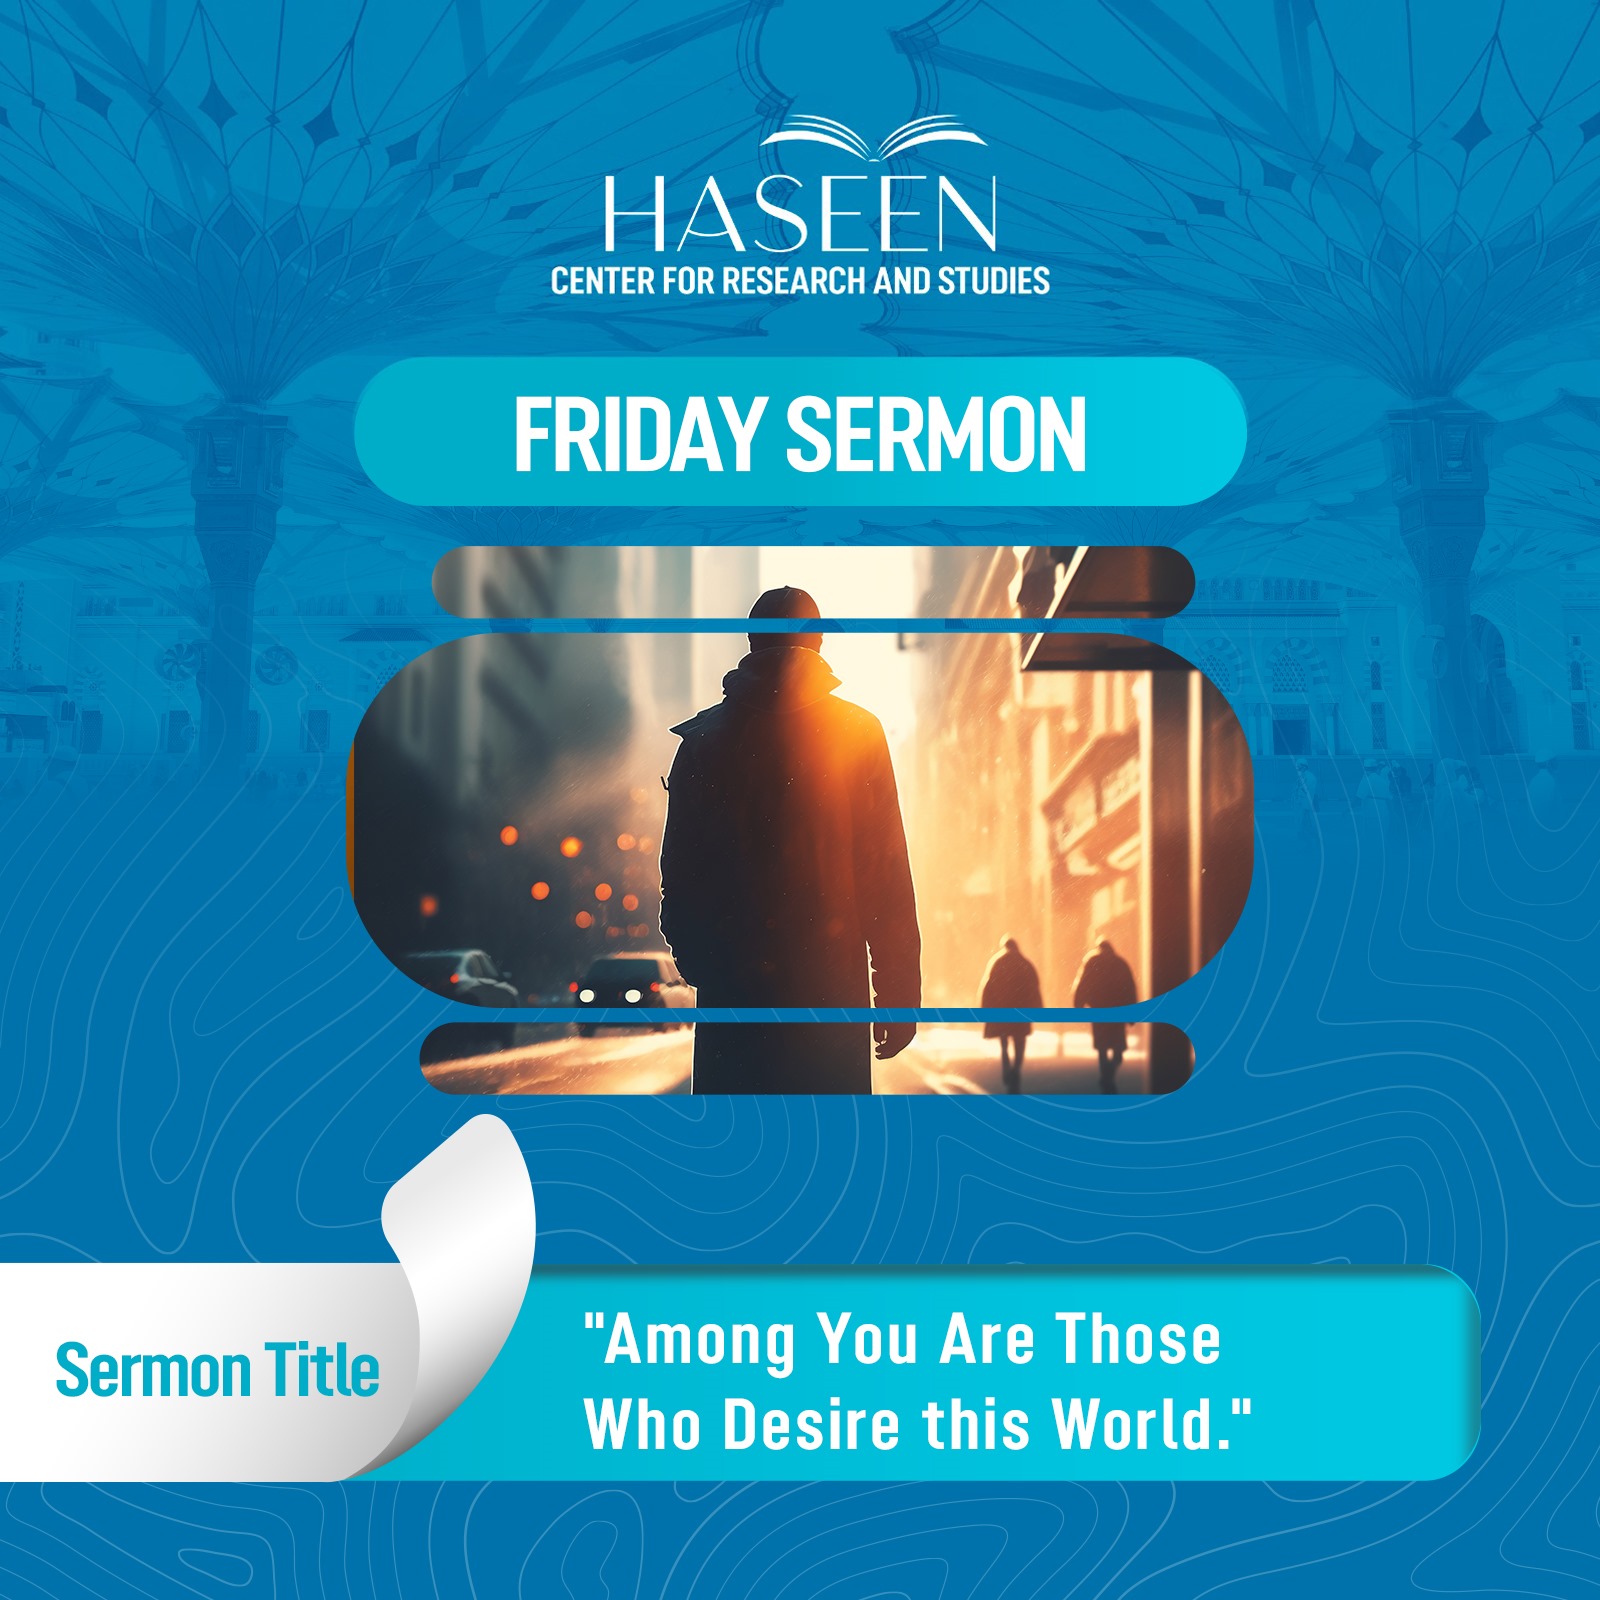 Title of the sermon: Among You Are Those Who Desire this World